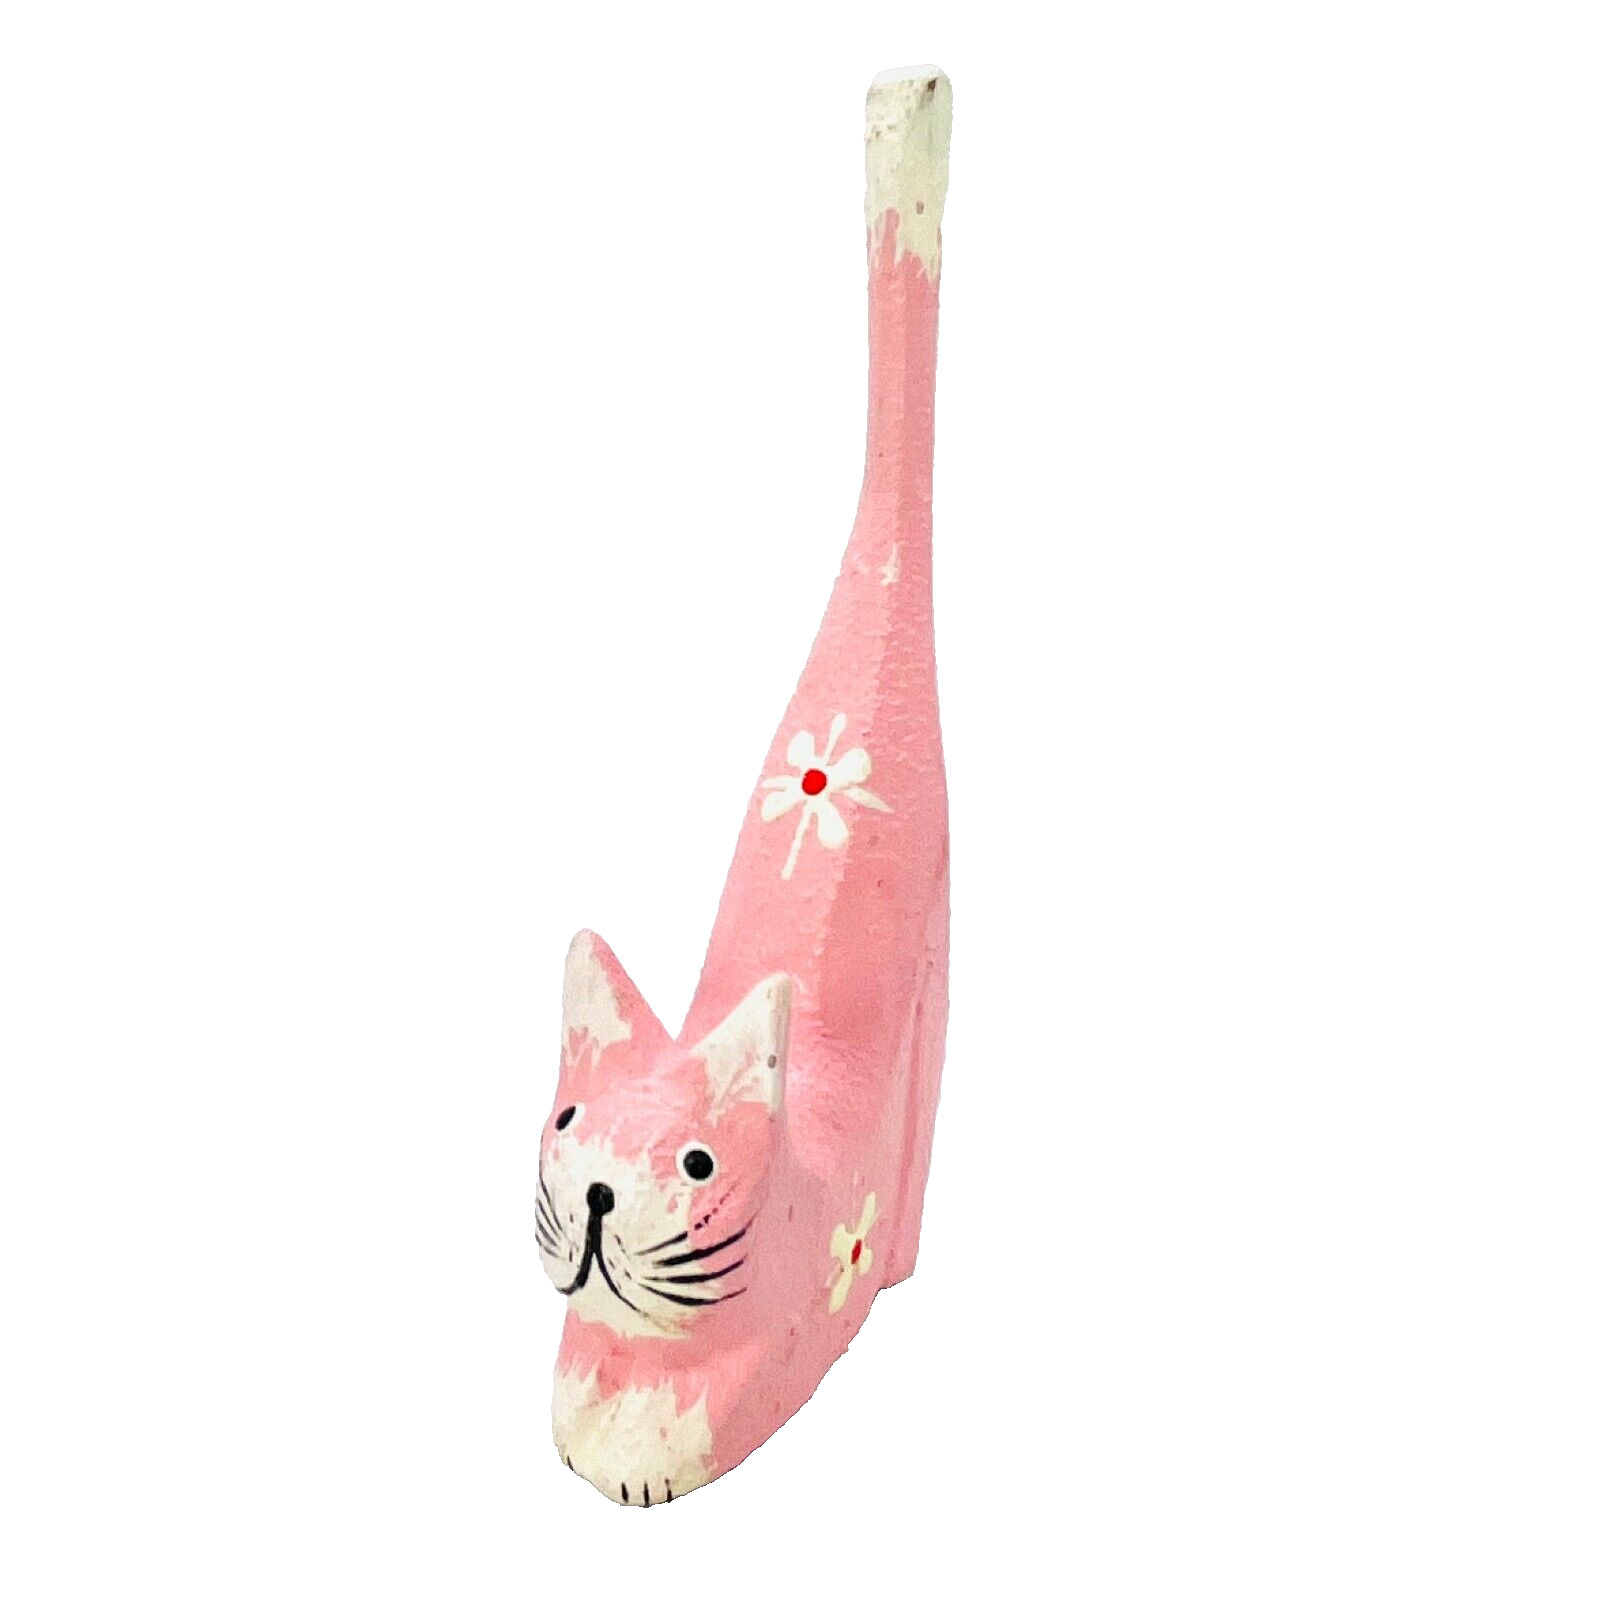 Bali Handmade Wooden Carved Cat Pink Indonesia 3in